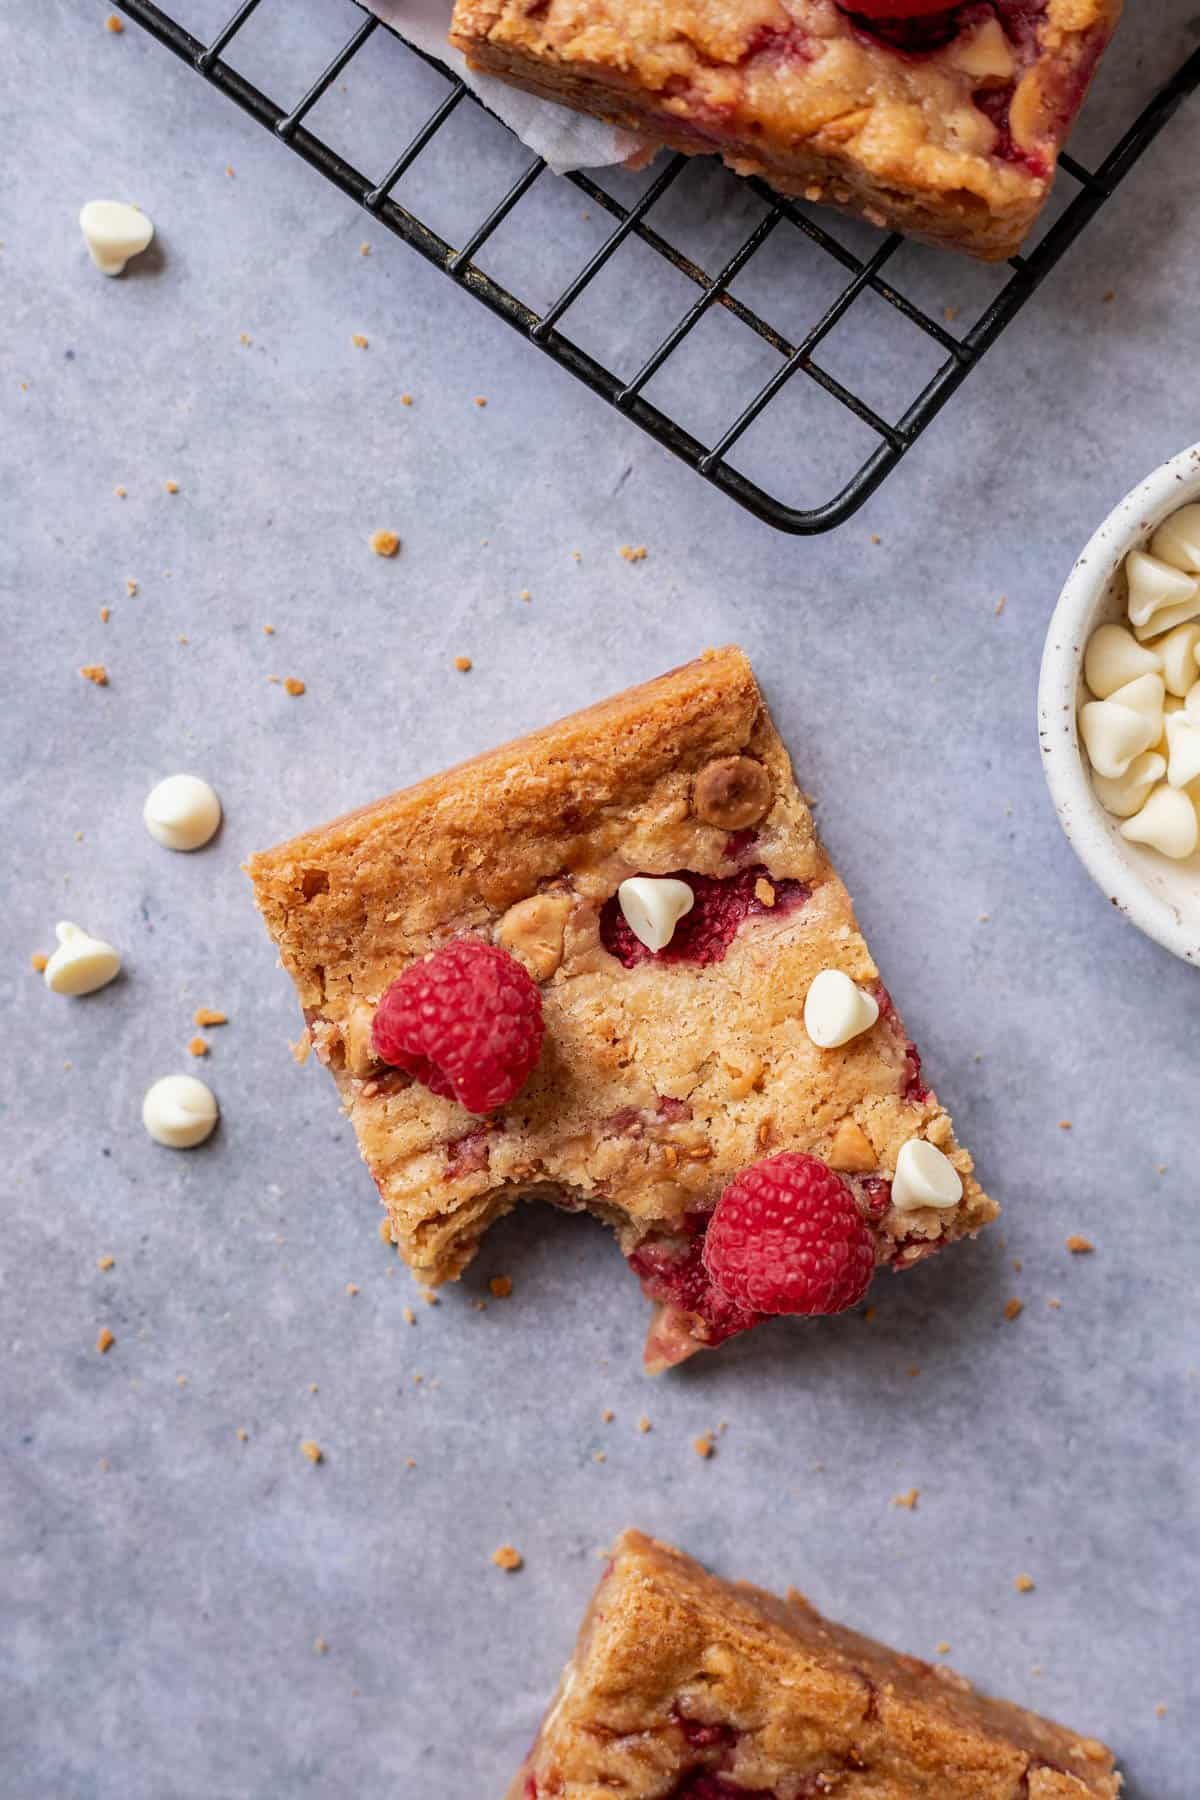 A white chocolate raspberry blondie with a bite taken out.